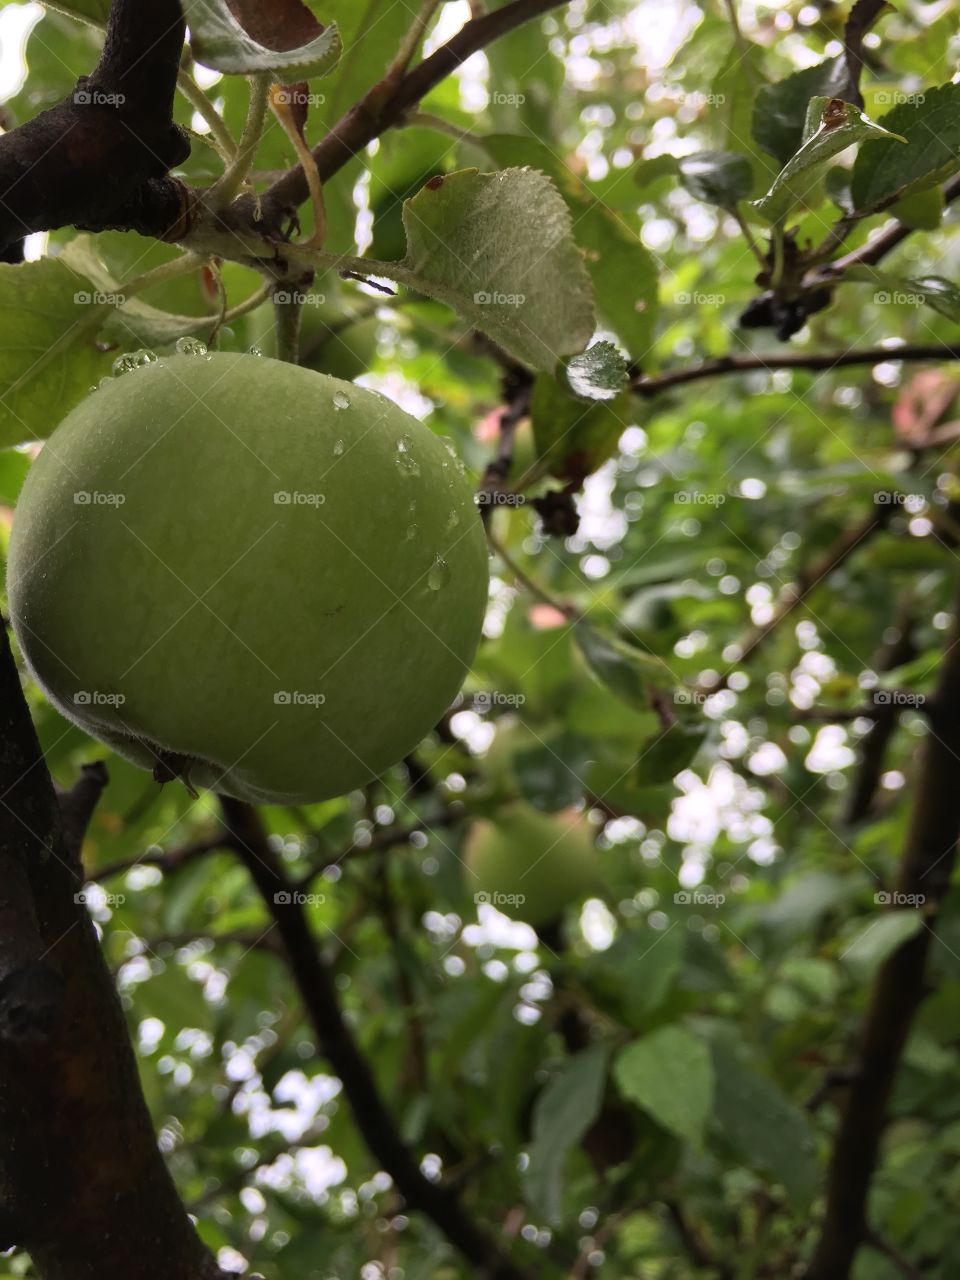 Apple in a rainy day